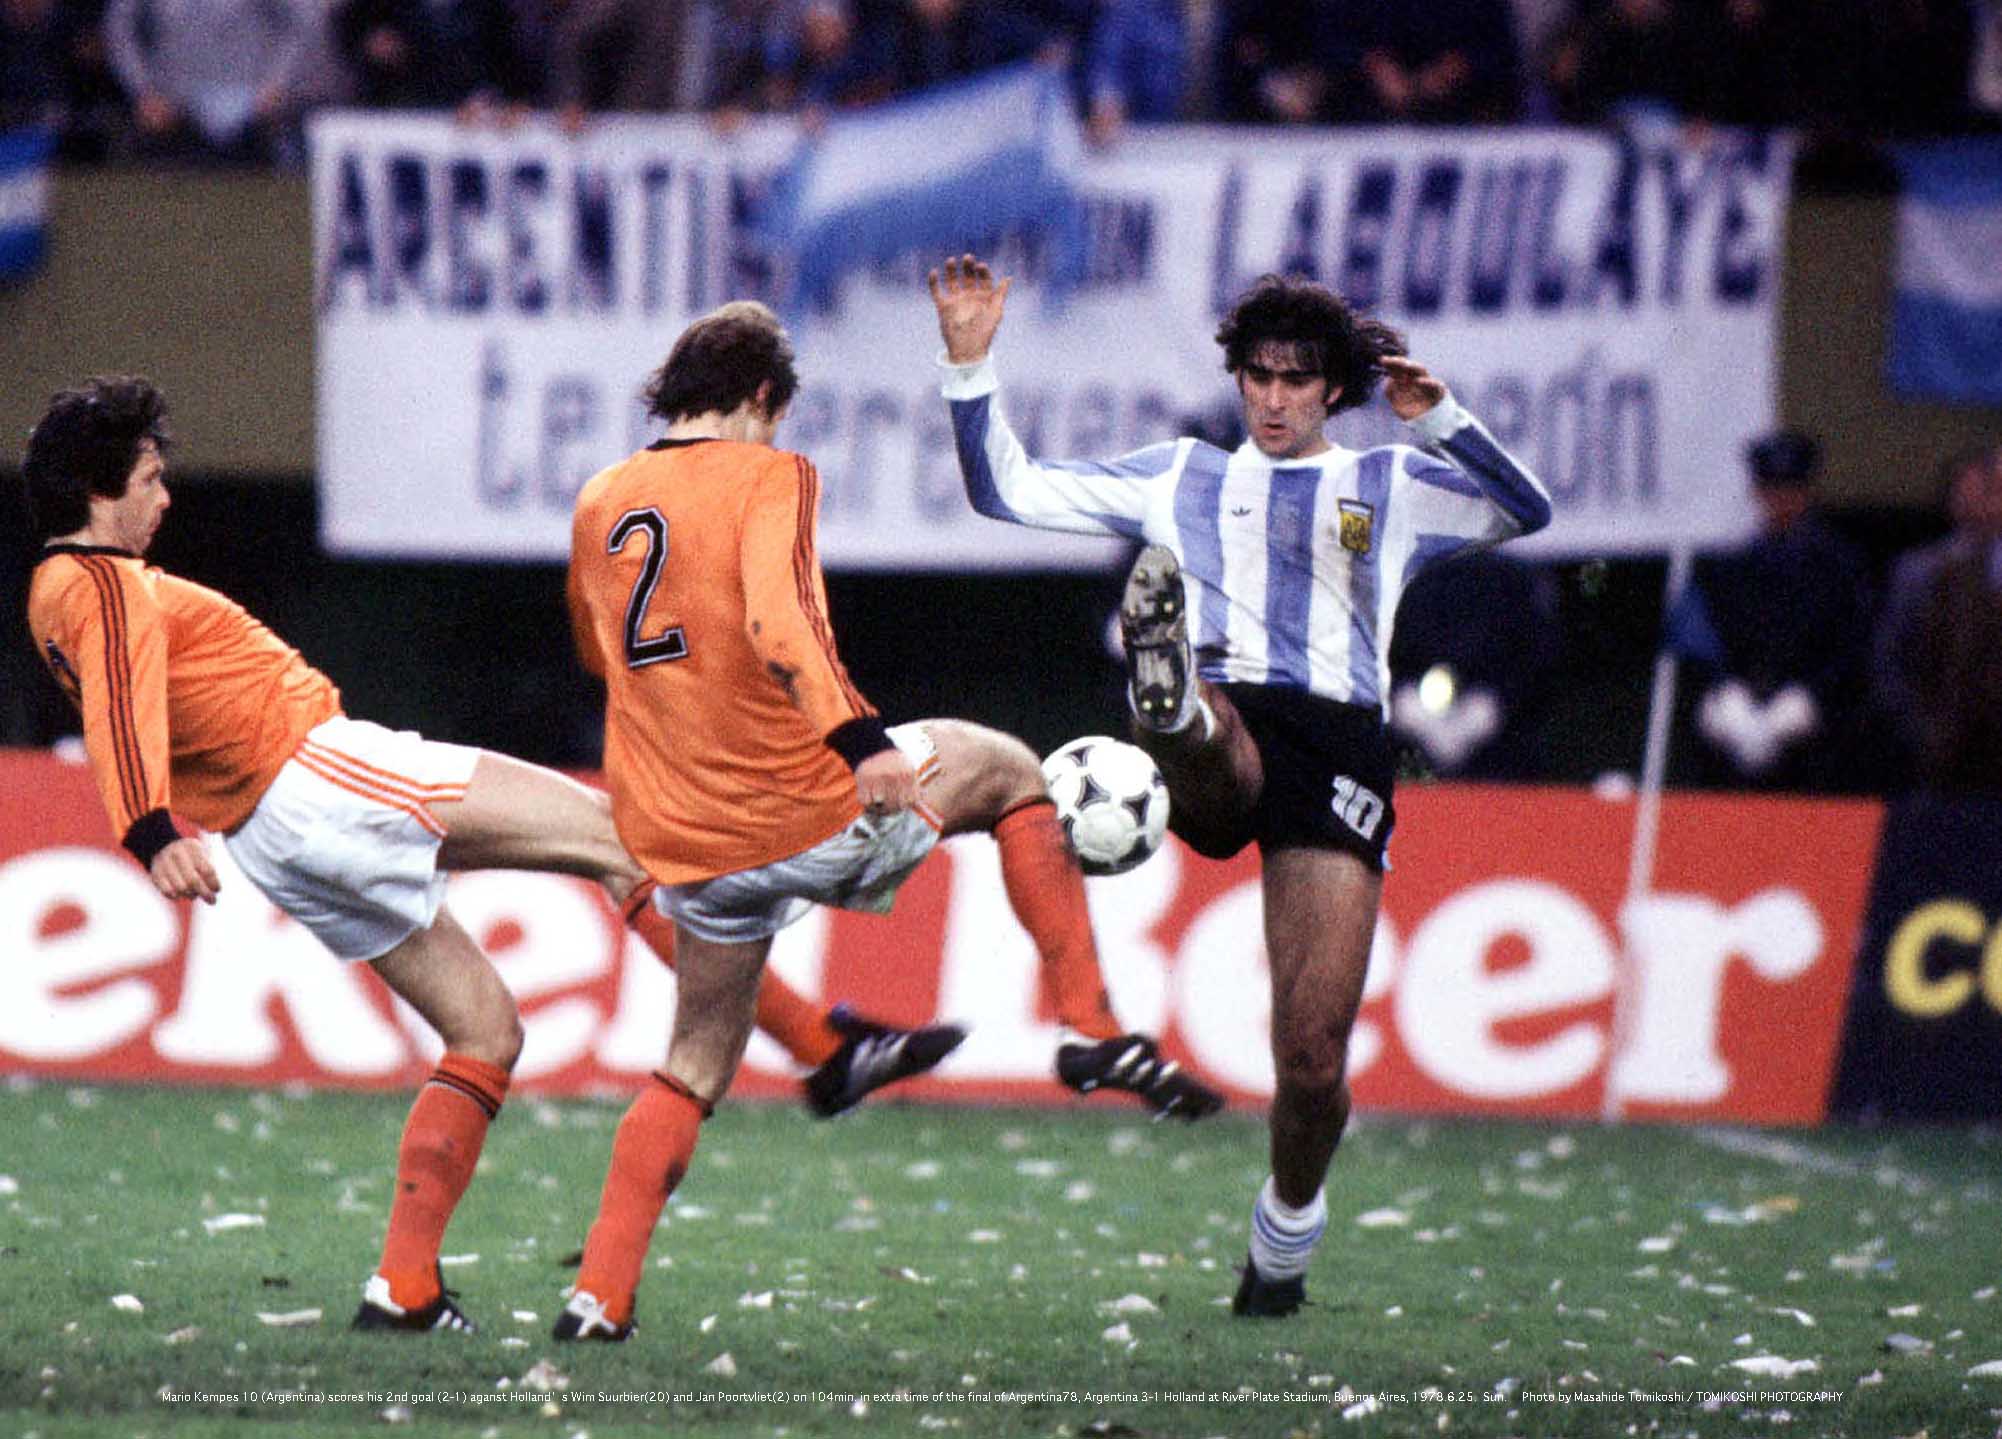 tphoto on X: Mario Kempes (Argentina) celebrates after his 2nd goal in the  final of World Cup Argentina78, Argentina 3-1 Holland at River Plate  Stadium, Buenos Aires, 1978.6.25. Sun.  / X